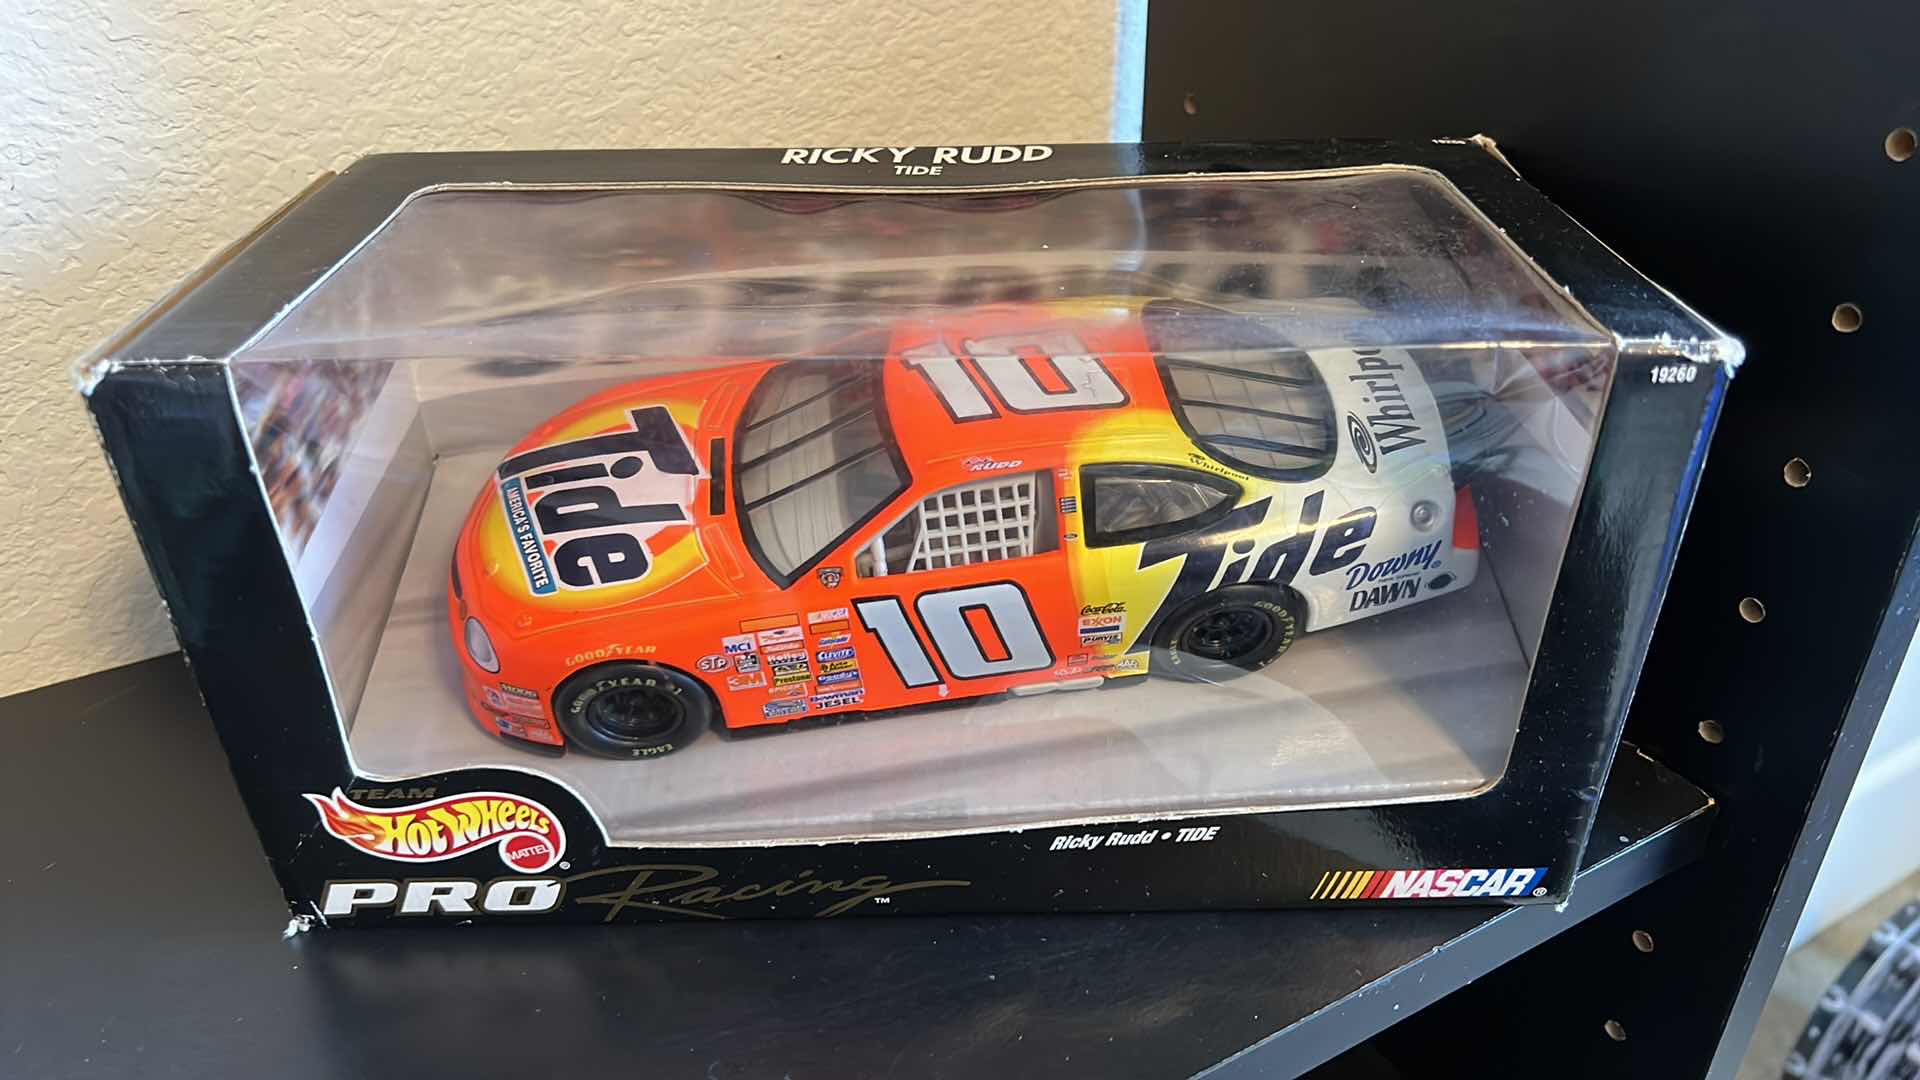 Photo 2 of 2 HOTWHEELS PRO CARS RICKY RUDD COLLECTIBLES